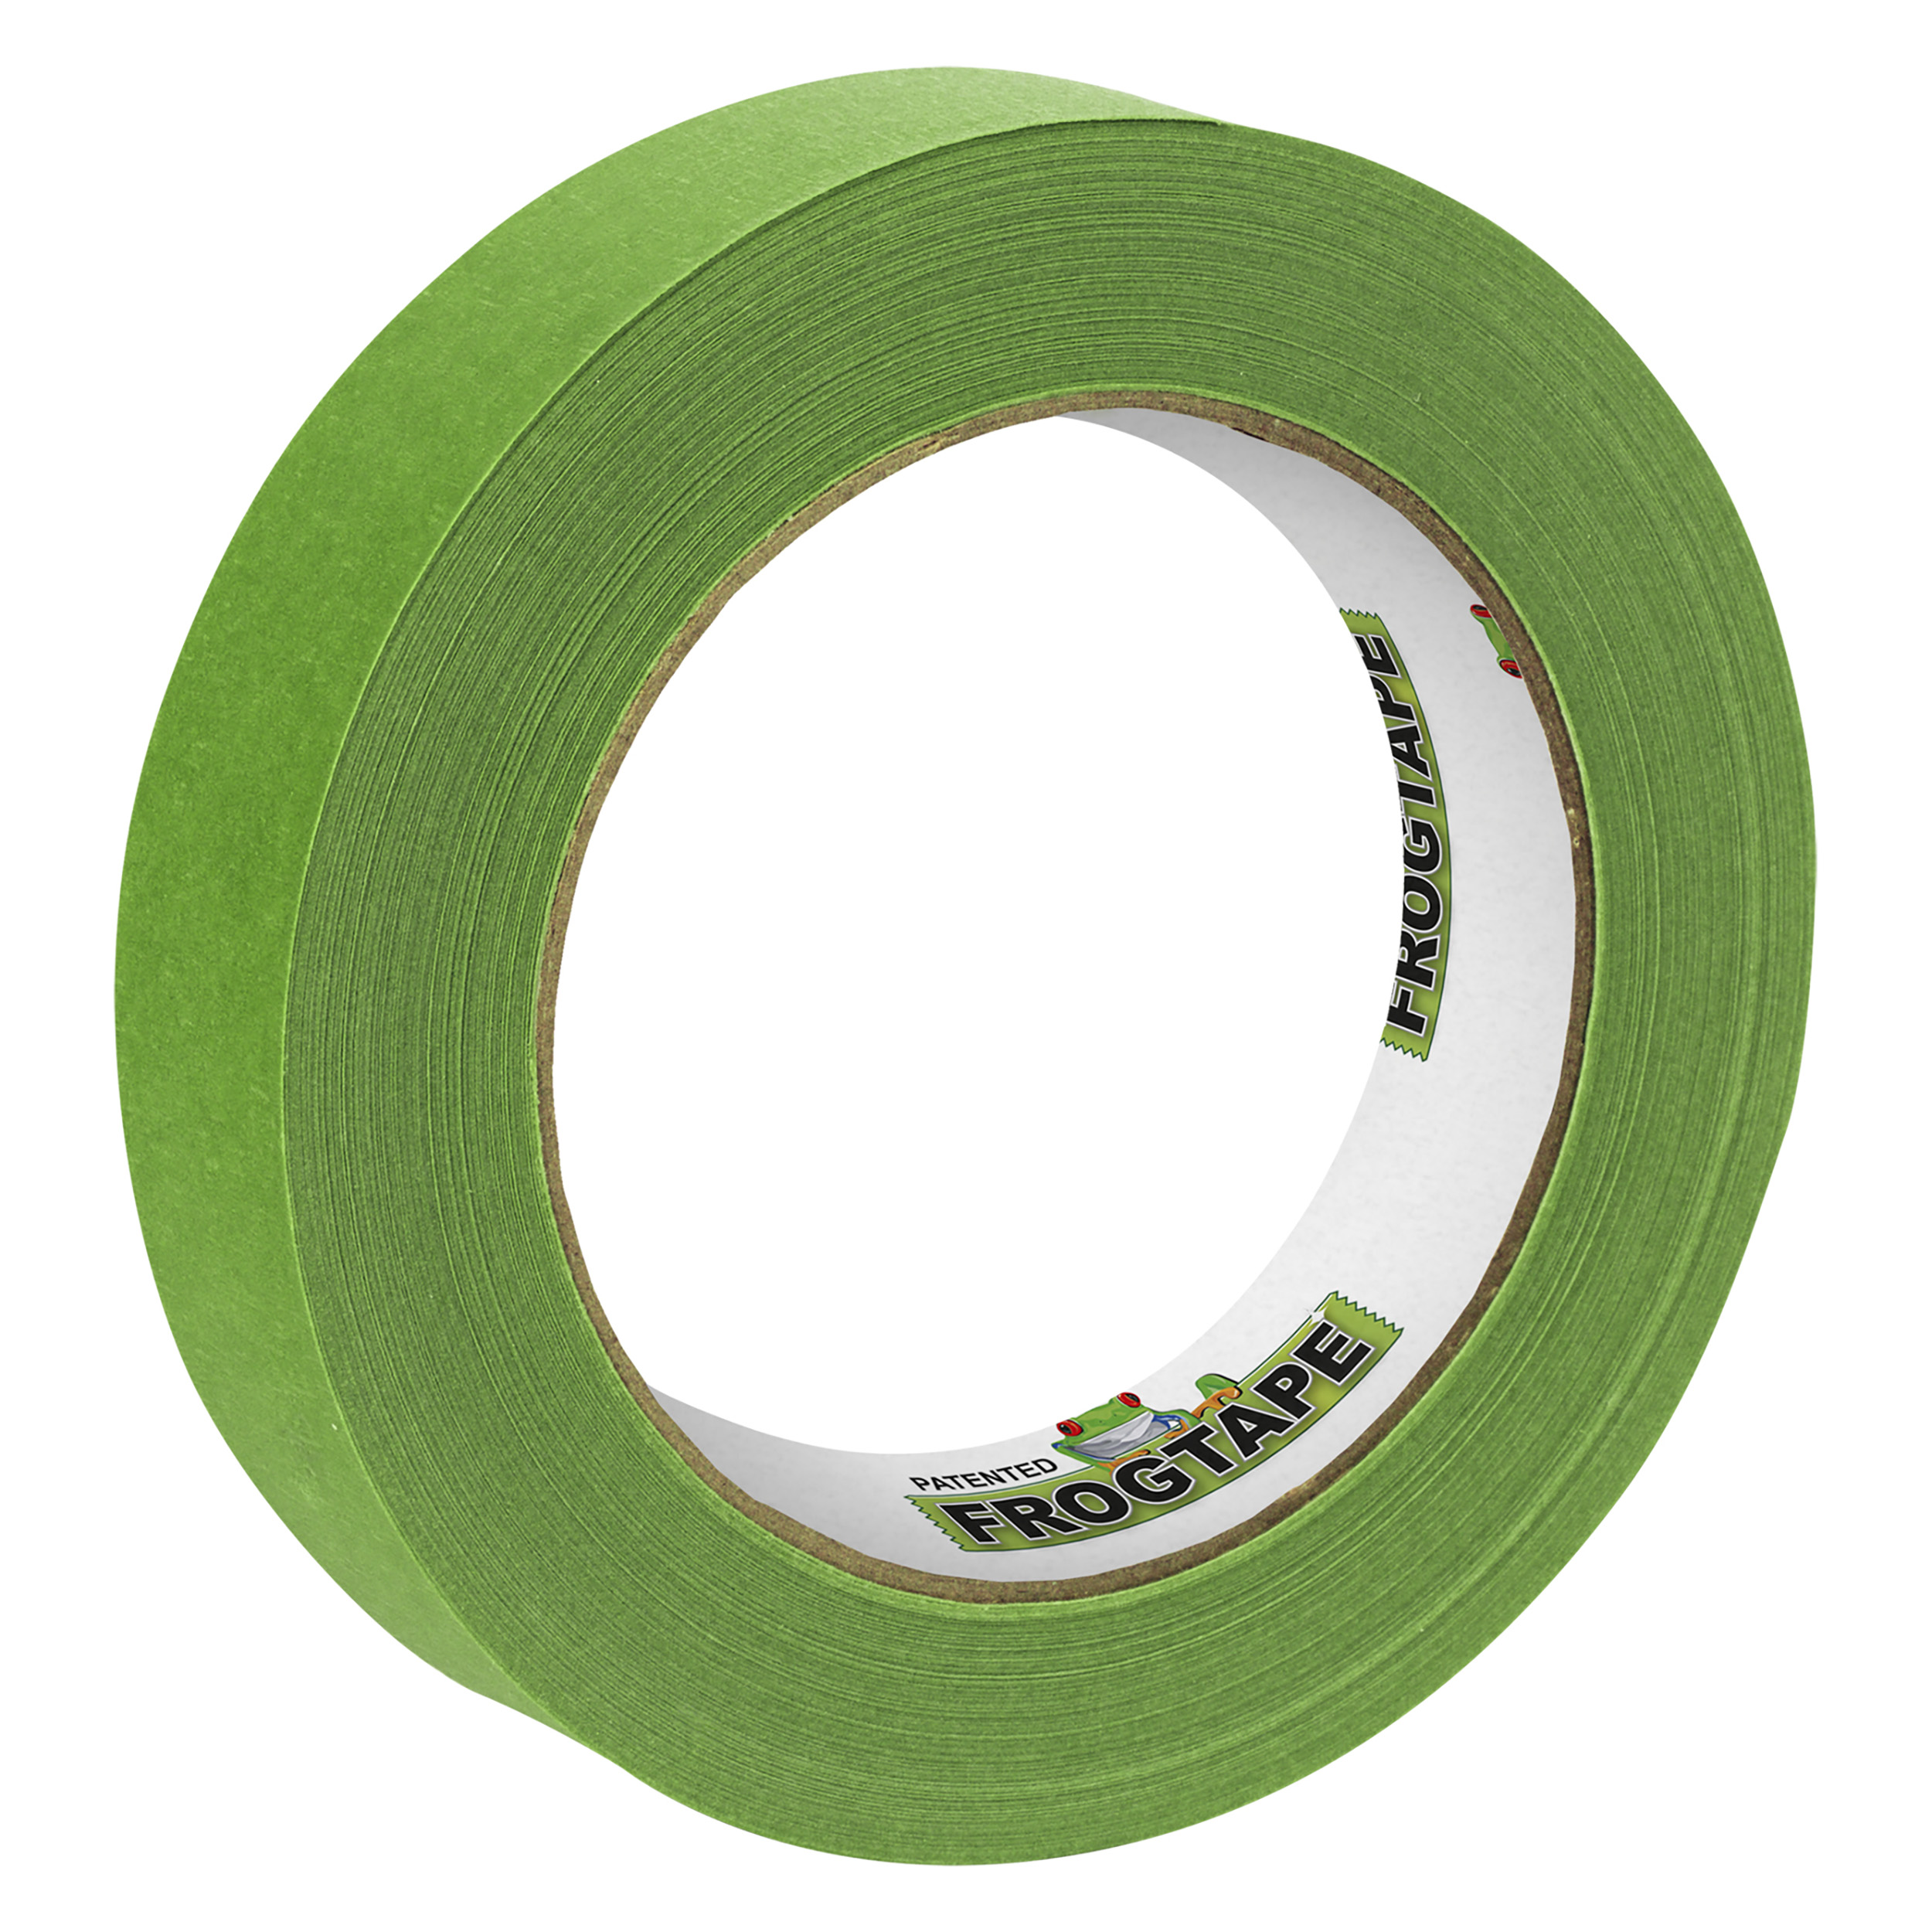 20.503.05 Frogtape  multi surface - 24 mm x 41.1 m